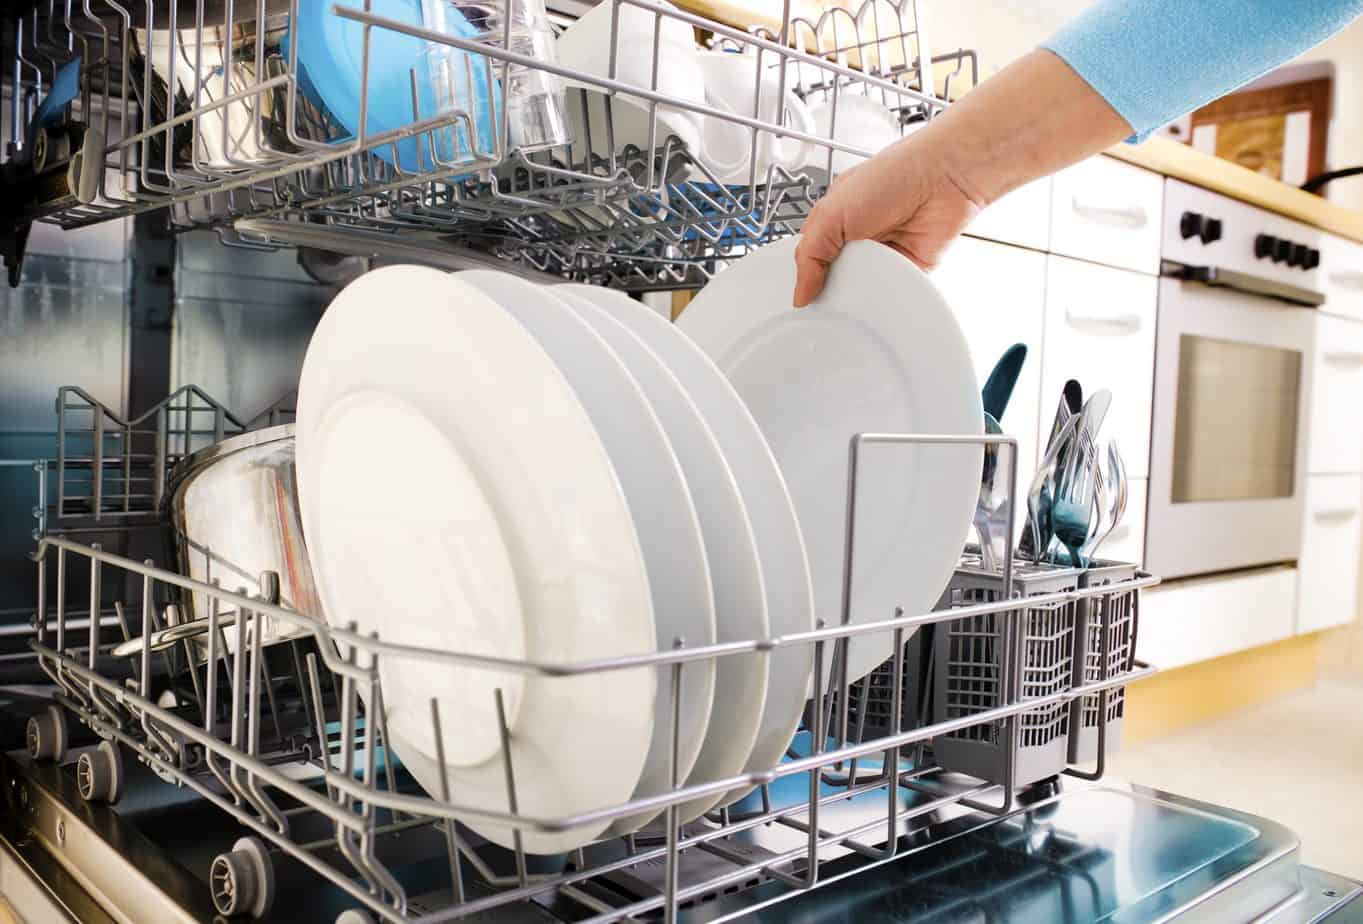 Buying a dishwasher – what parameters should I pay attention to?